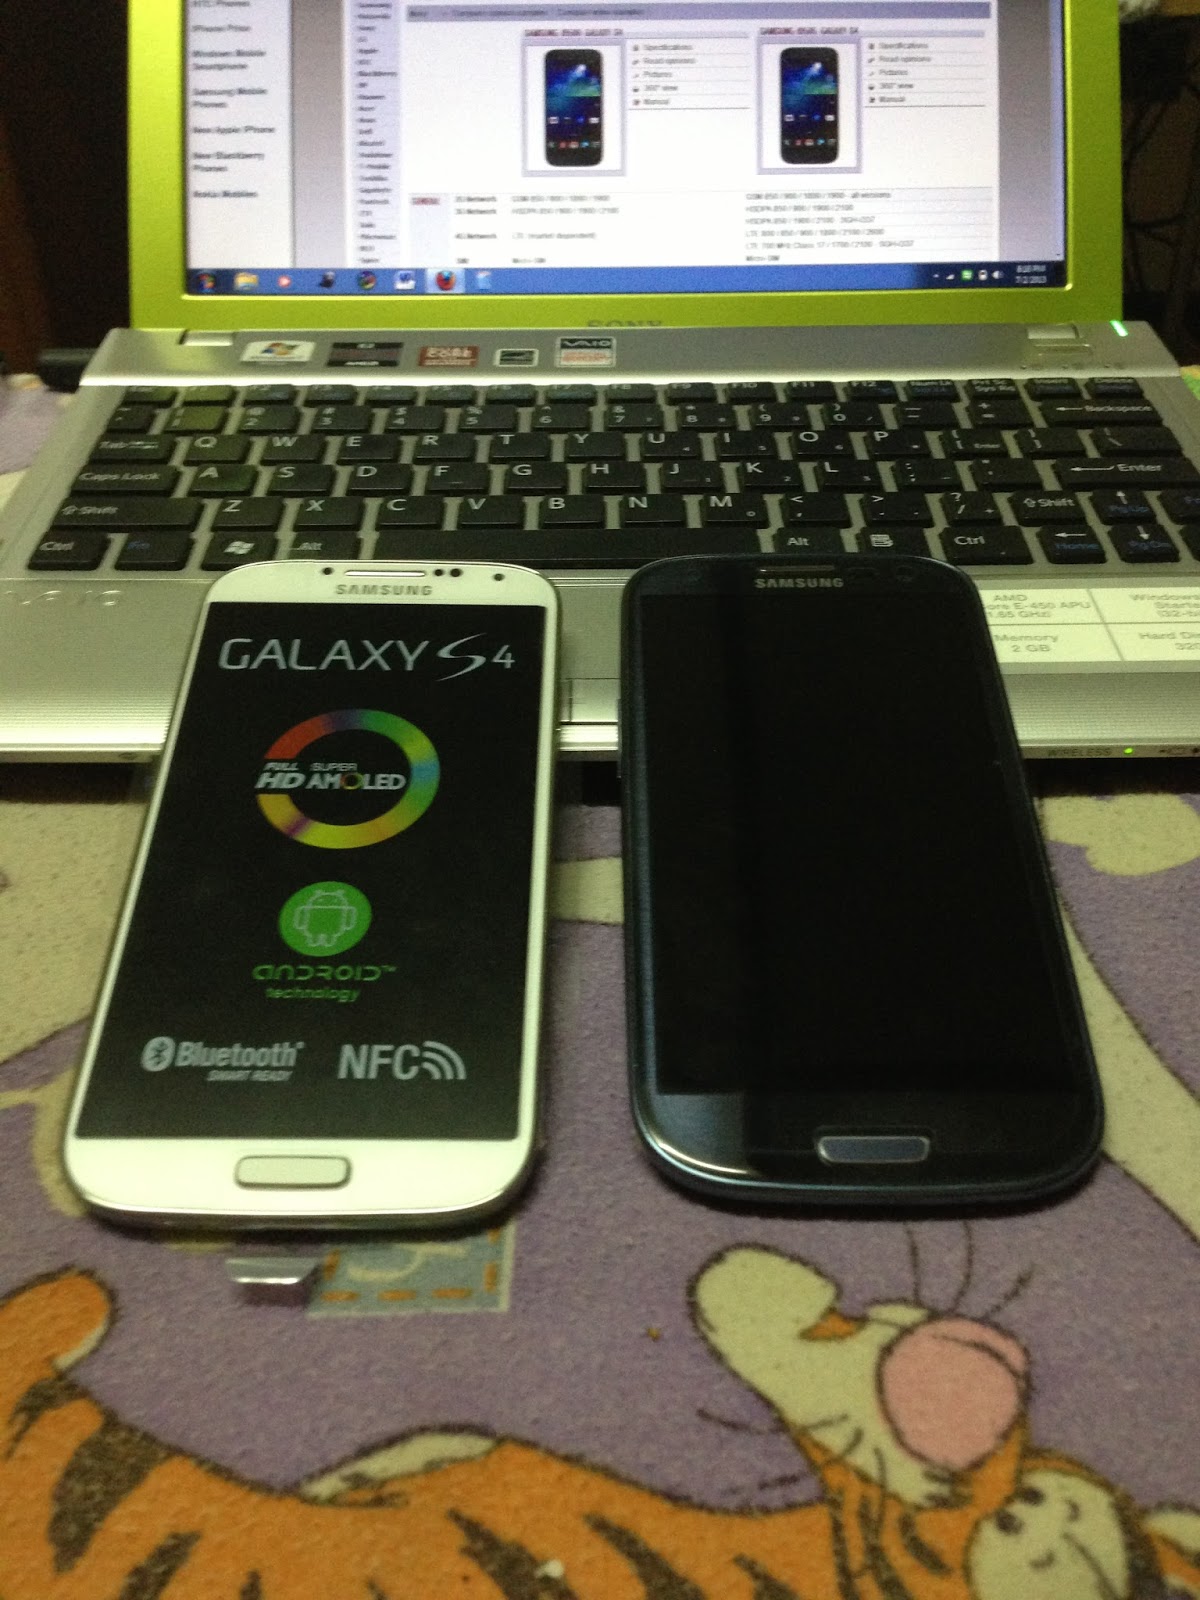 Addicted To Online Shopping!: Samsung Galaxy S4- My life companion!